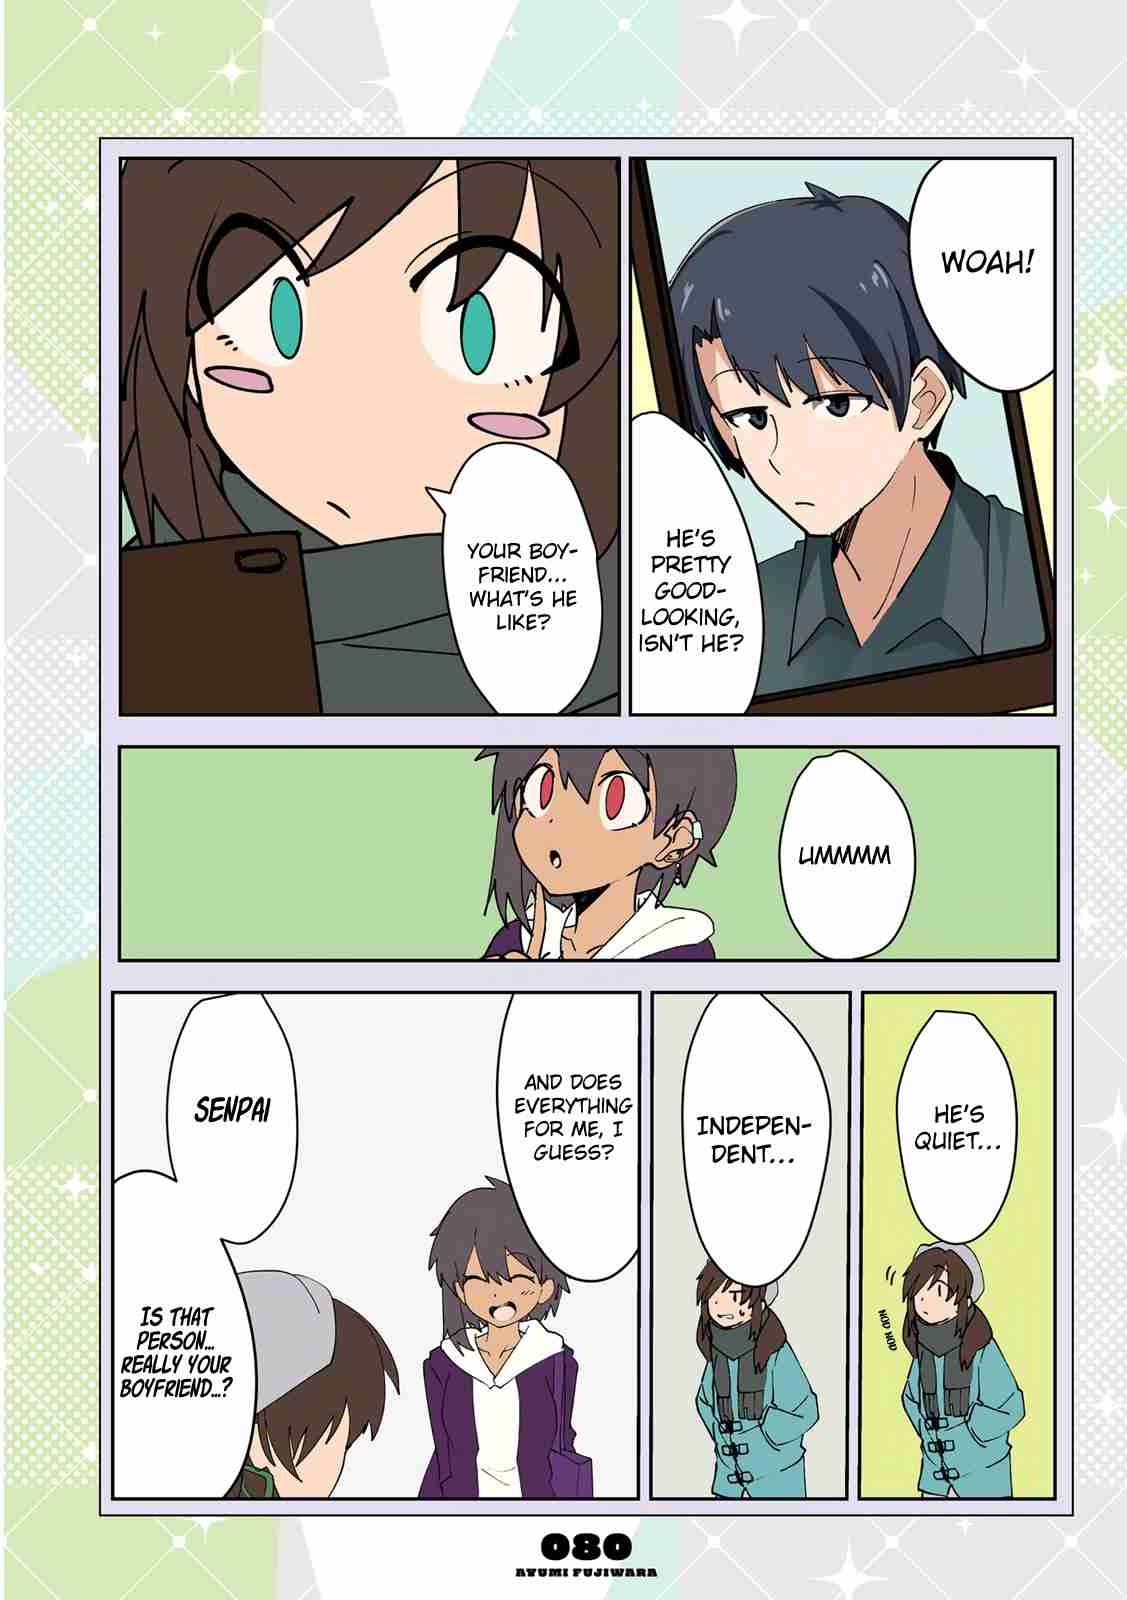 Mousou Timeline Vol. 1 Ch. 6.3 The Kind, Tanned Girl And Her Considerate Kouhai